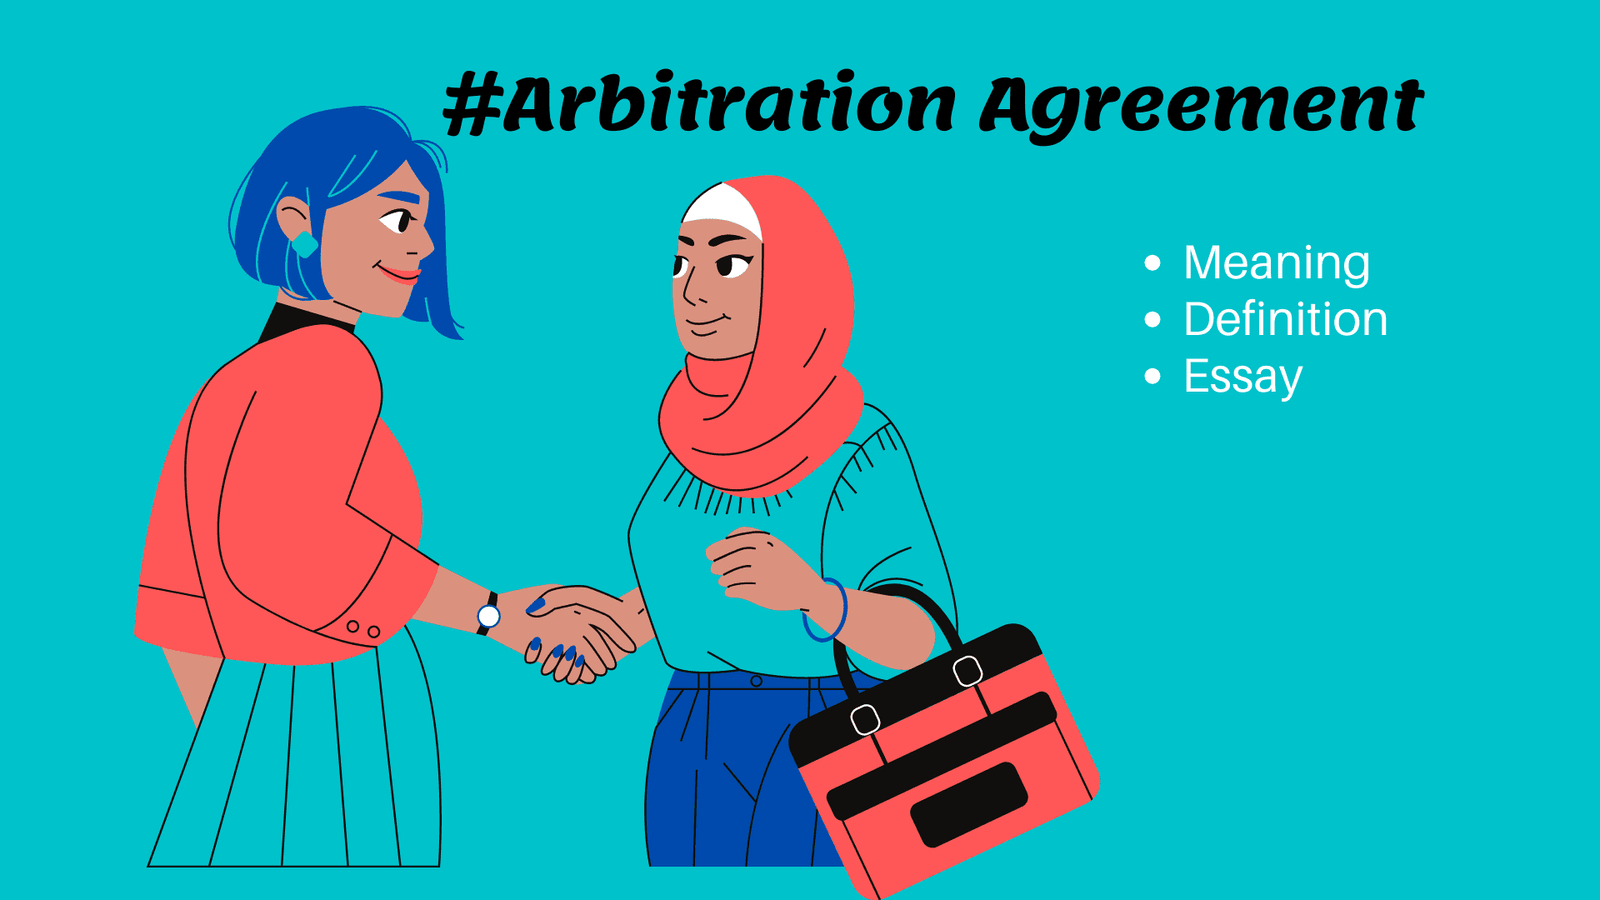 Essay on the Arbitration Agreement Image